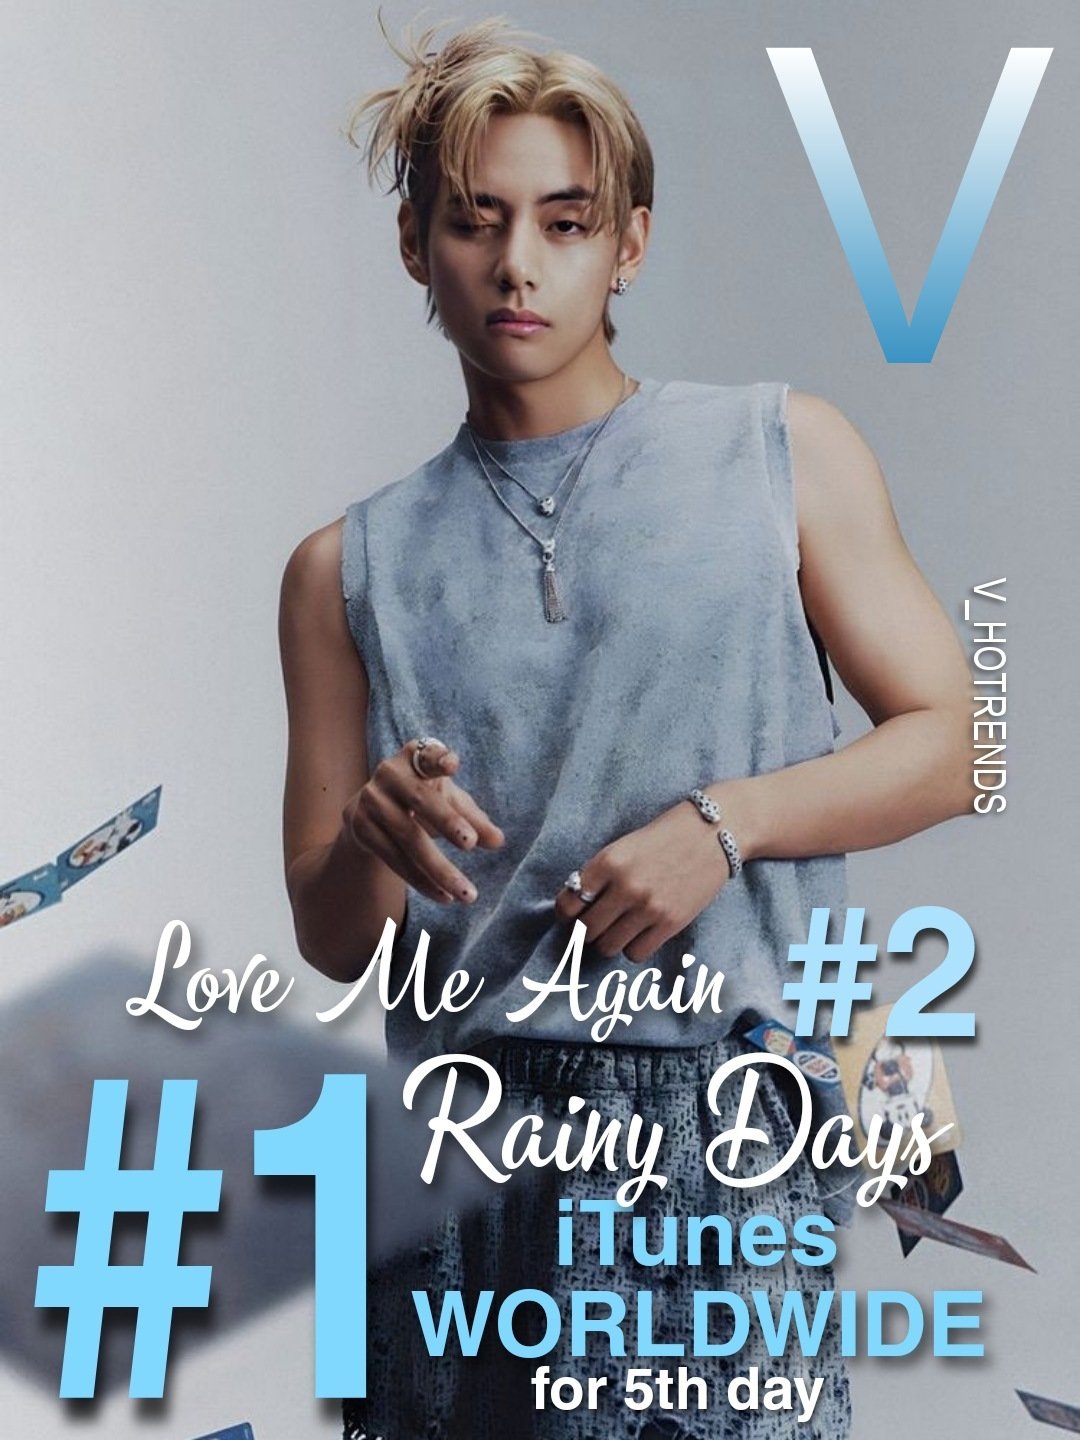 BTS V's 'Rainy Days' tops iTunes in 70 countries